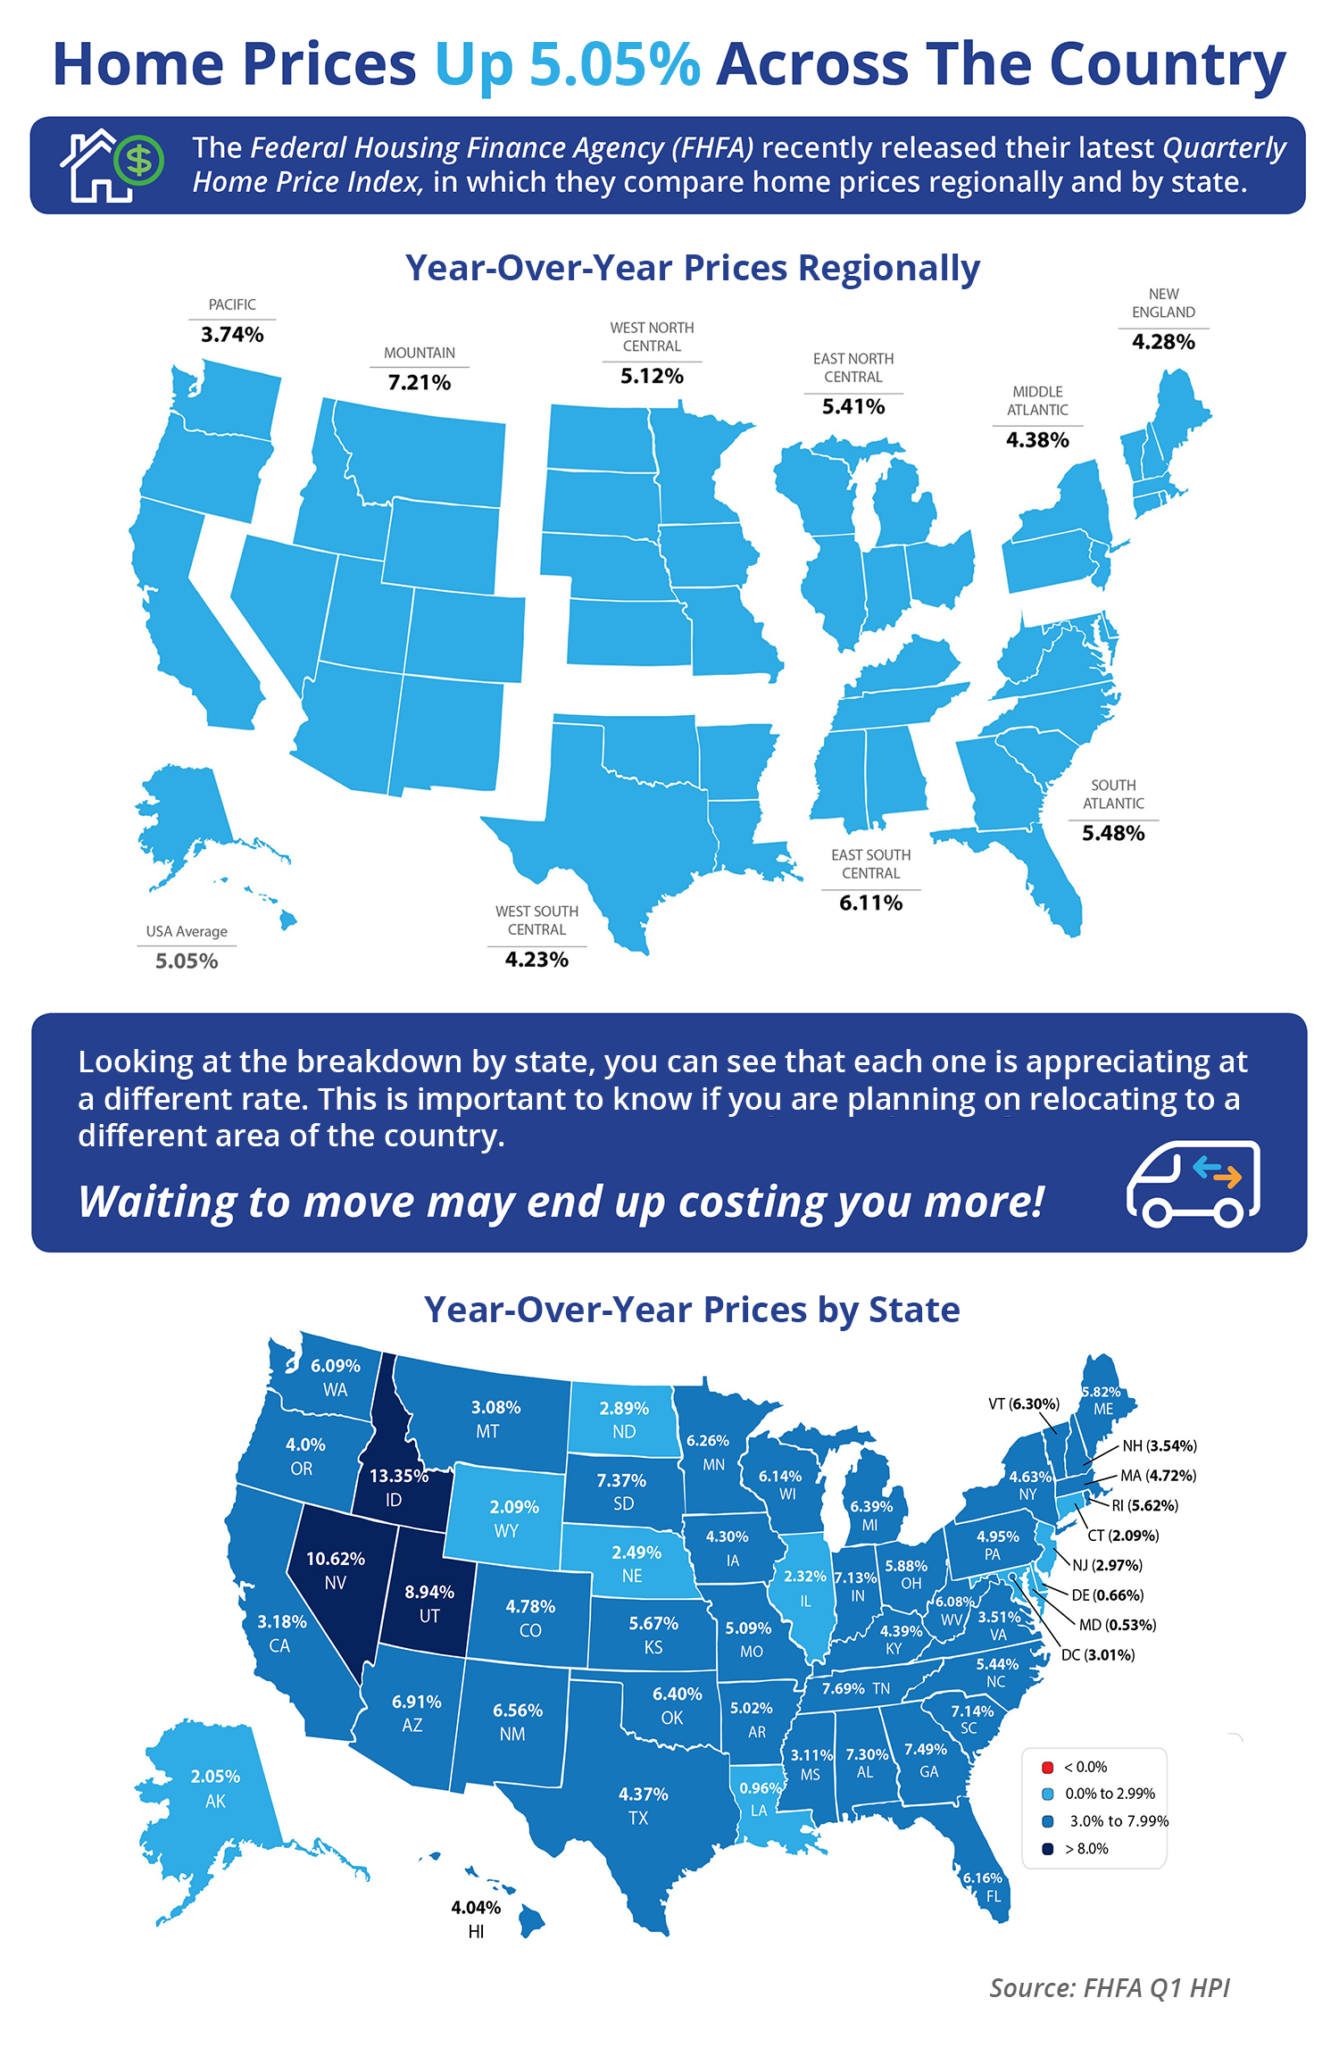 Home Prices Up 5.05% Across the Country [INFOGRAPHIC] | Simplifying The Market